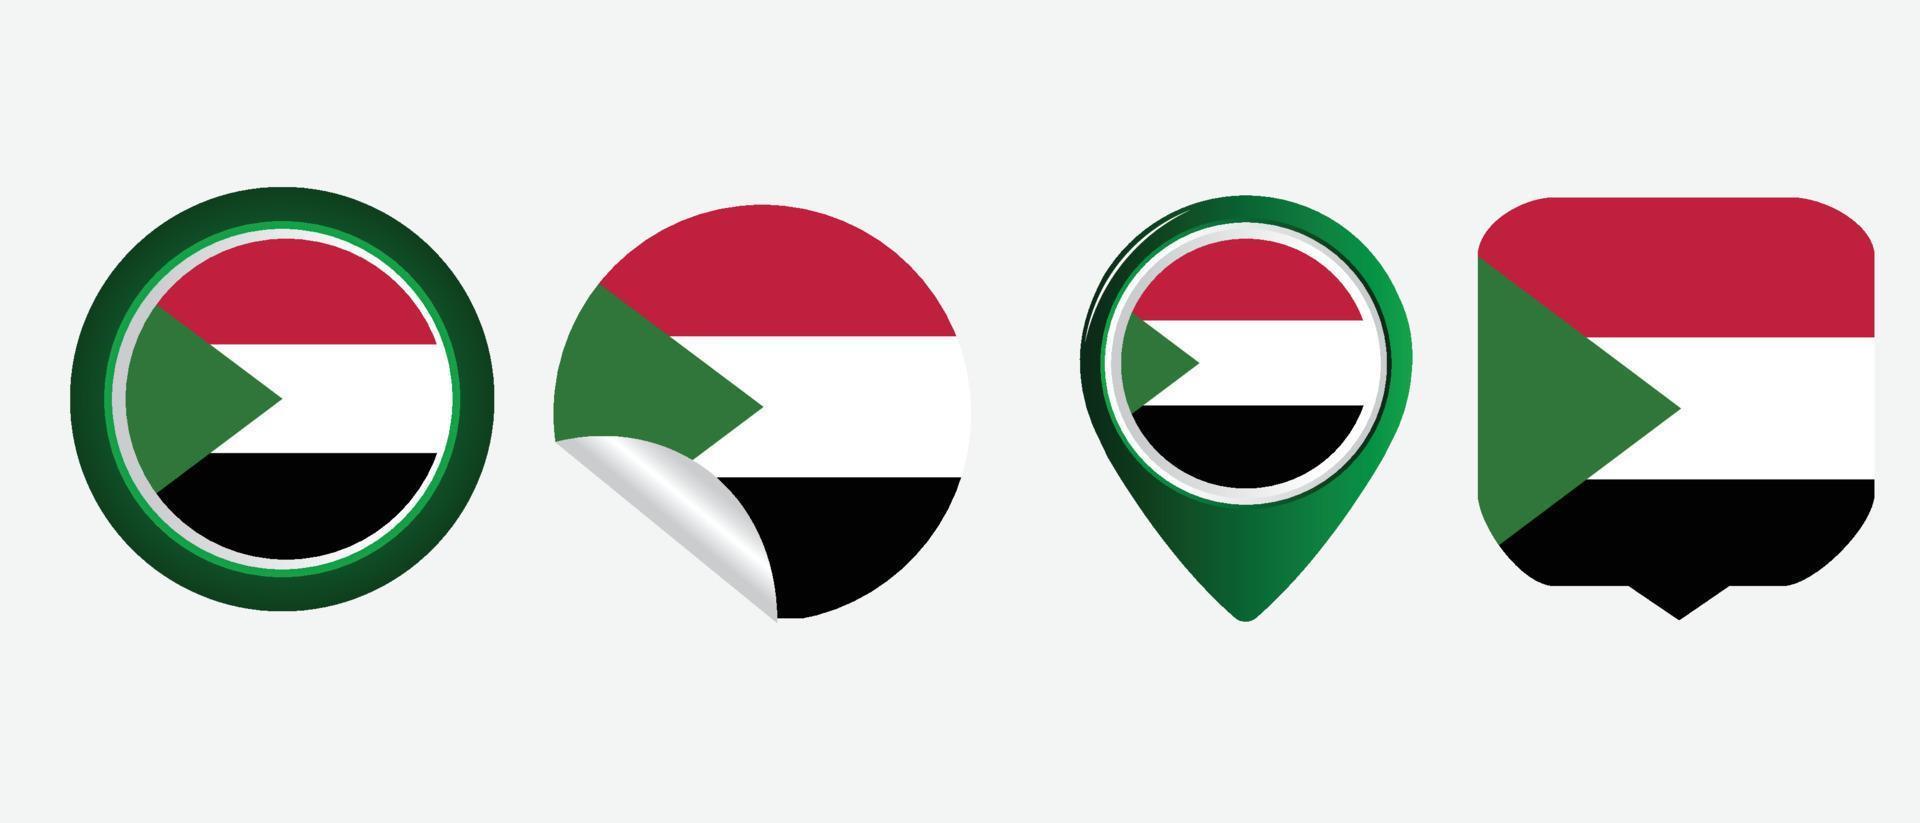 Sudan flag icon . web icon set . icons collection flat. Simple vector illustration.